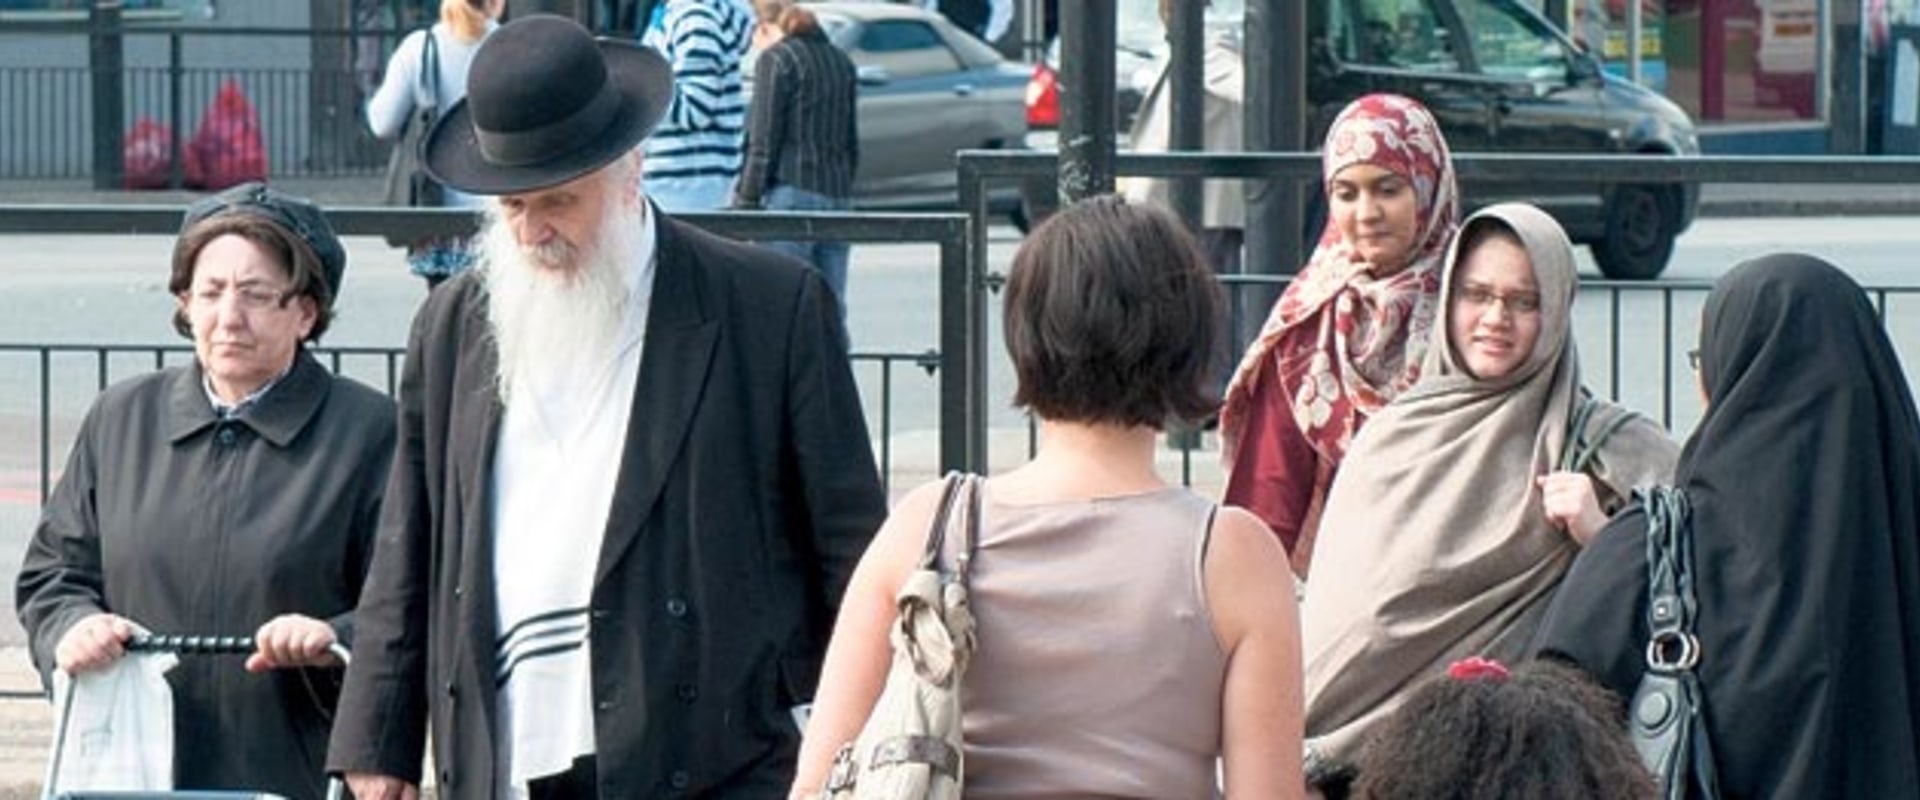 Exploring the Richness of Jewish Culture in London